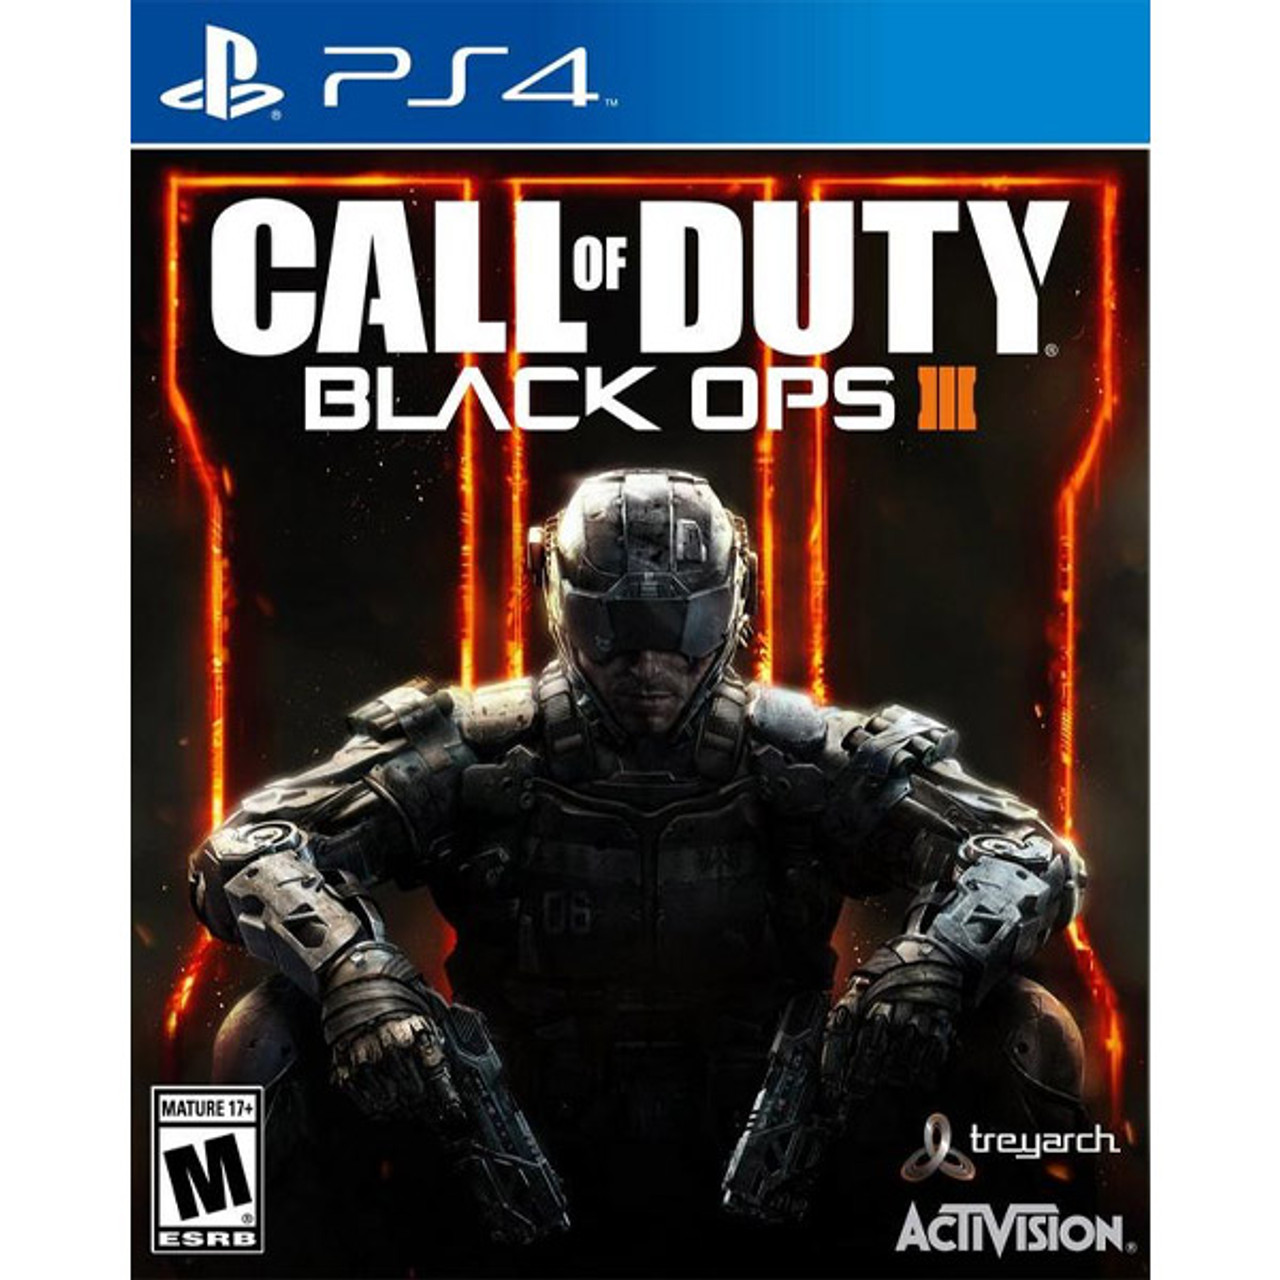 Duty Black Ops Playstation 4 PS4 Game Sale